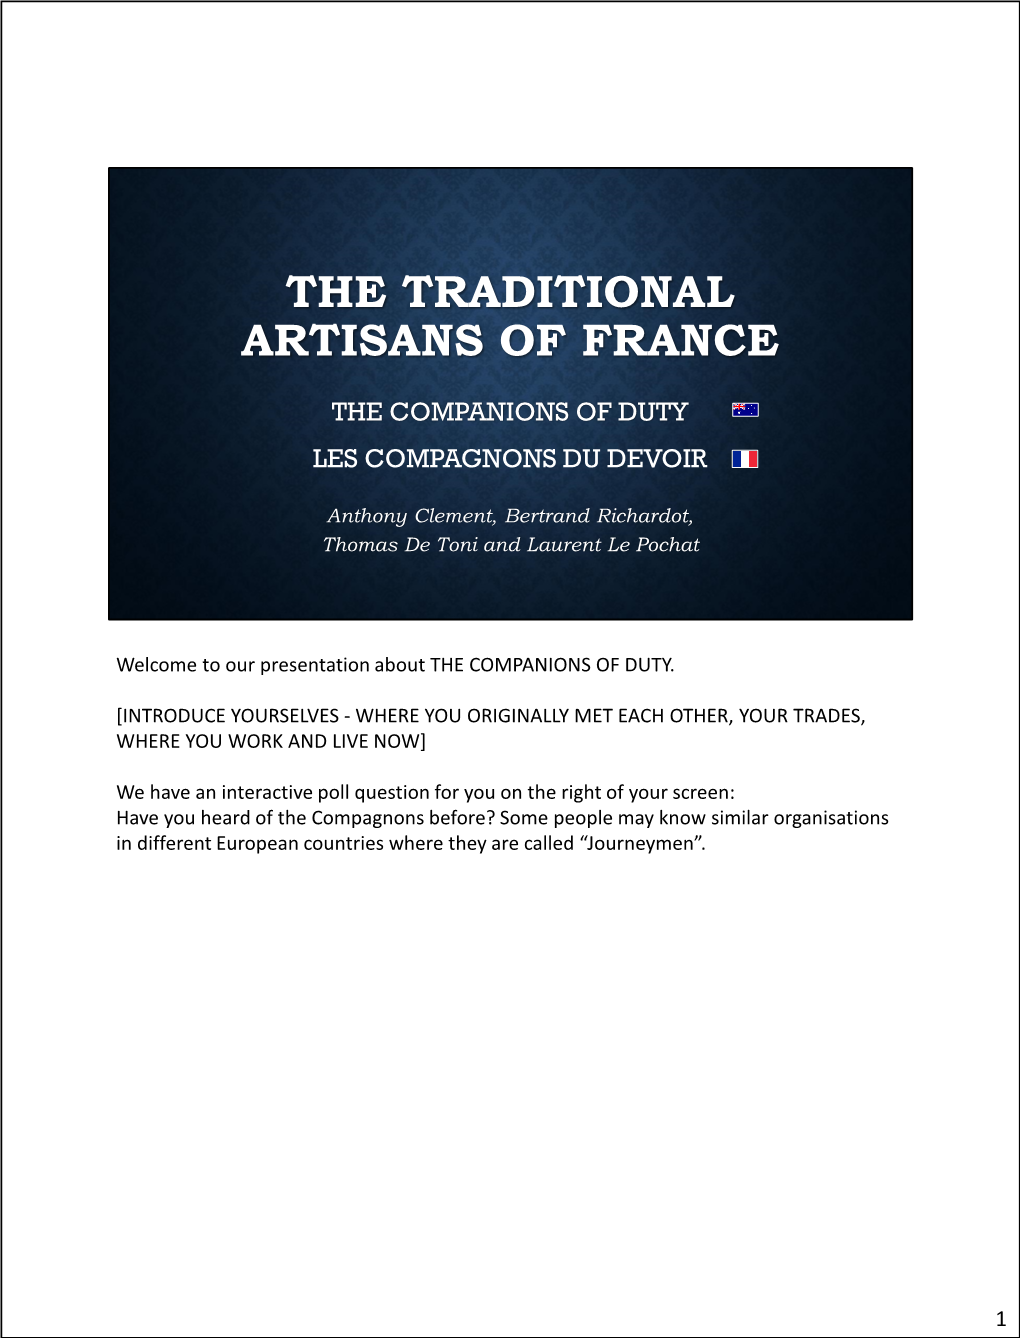 The Traditional Artisans of France